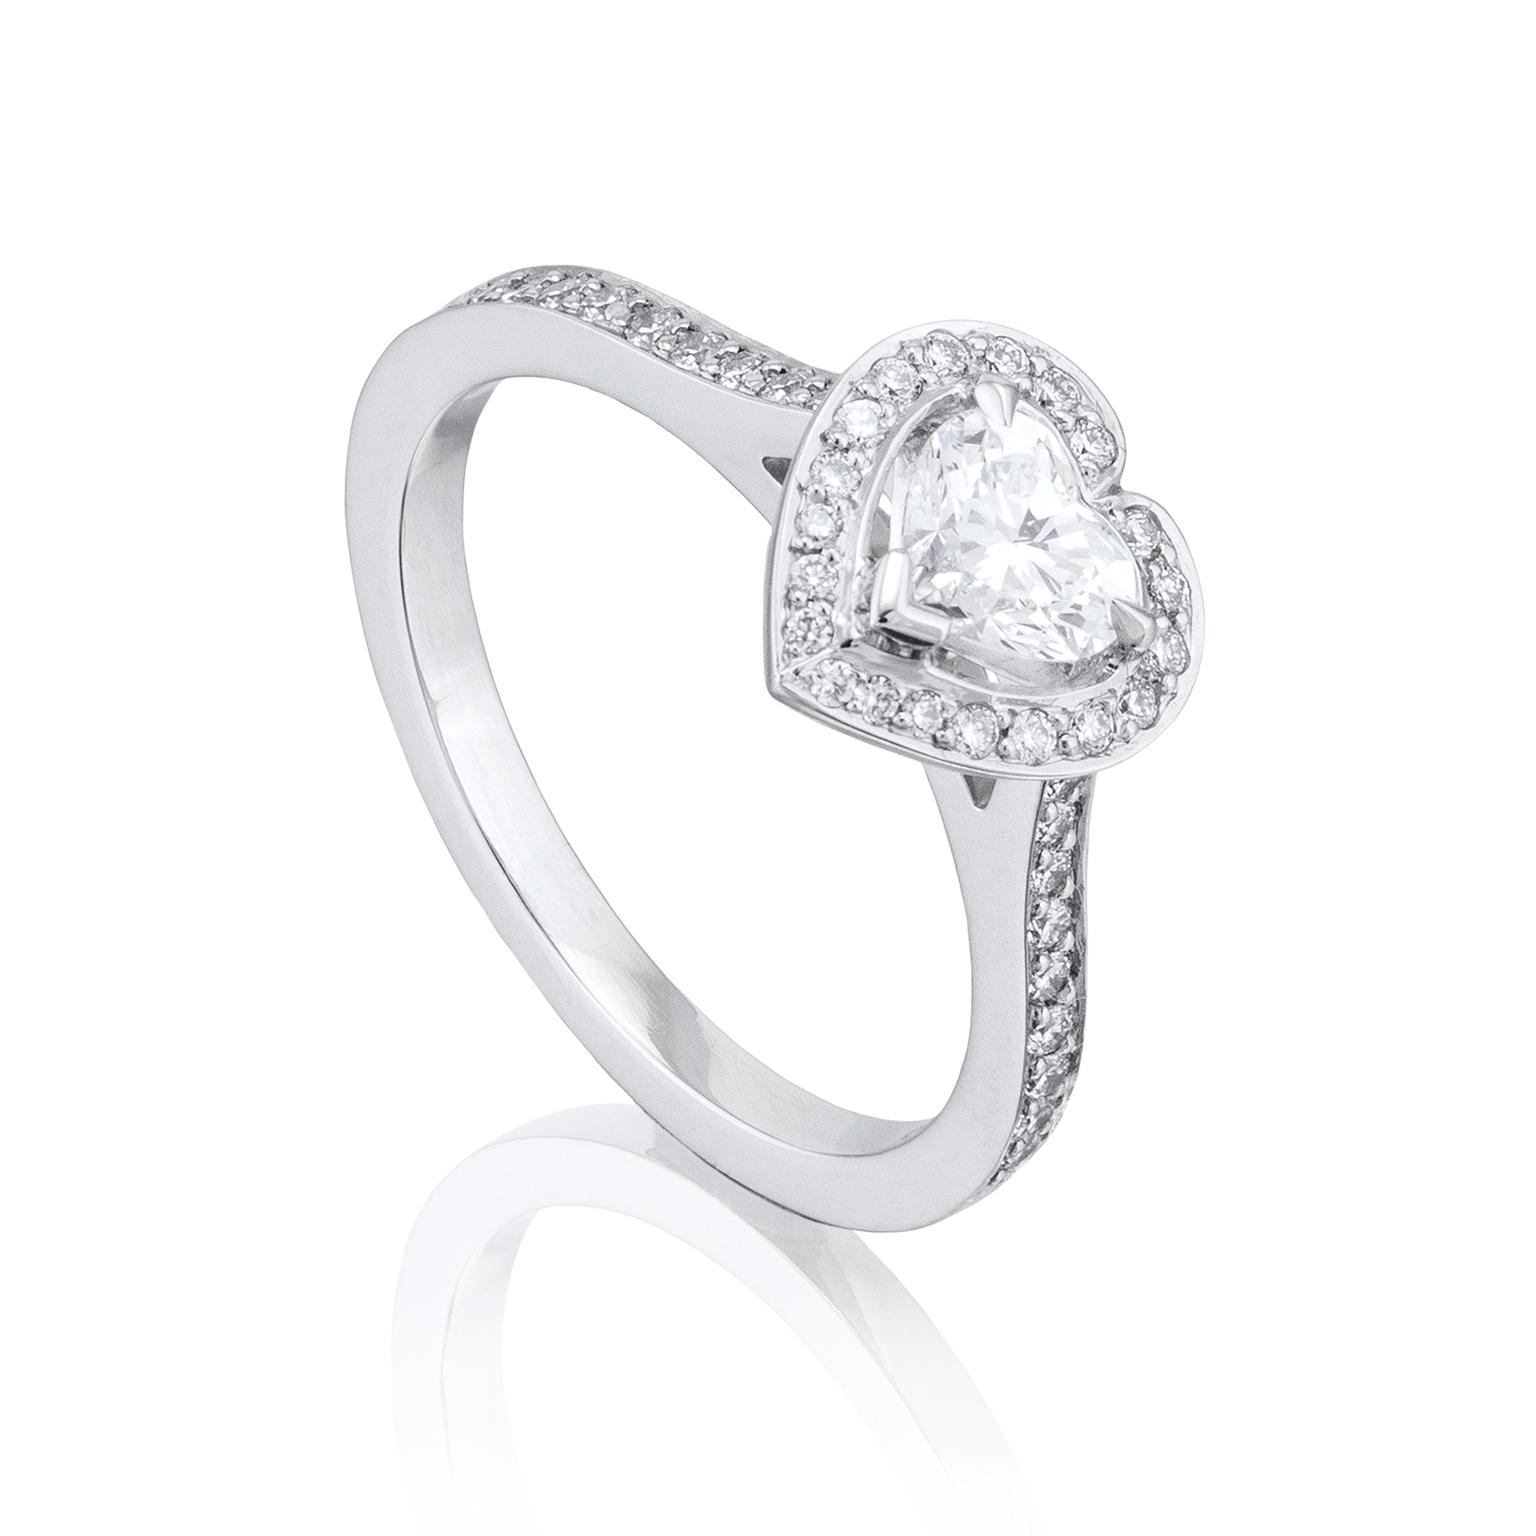 Boodles heart-shaped engagement ring